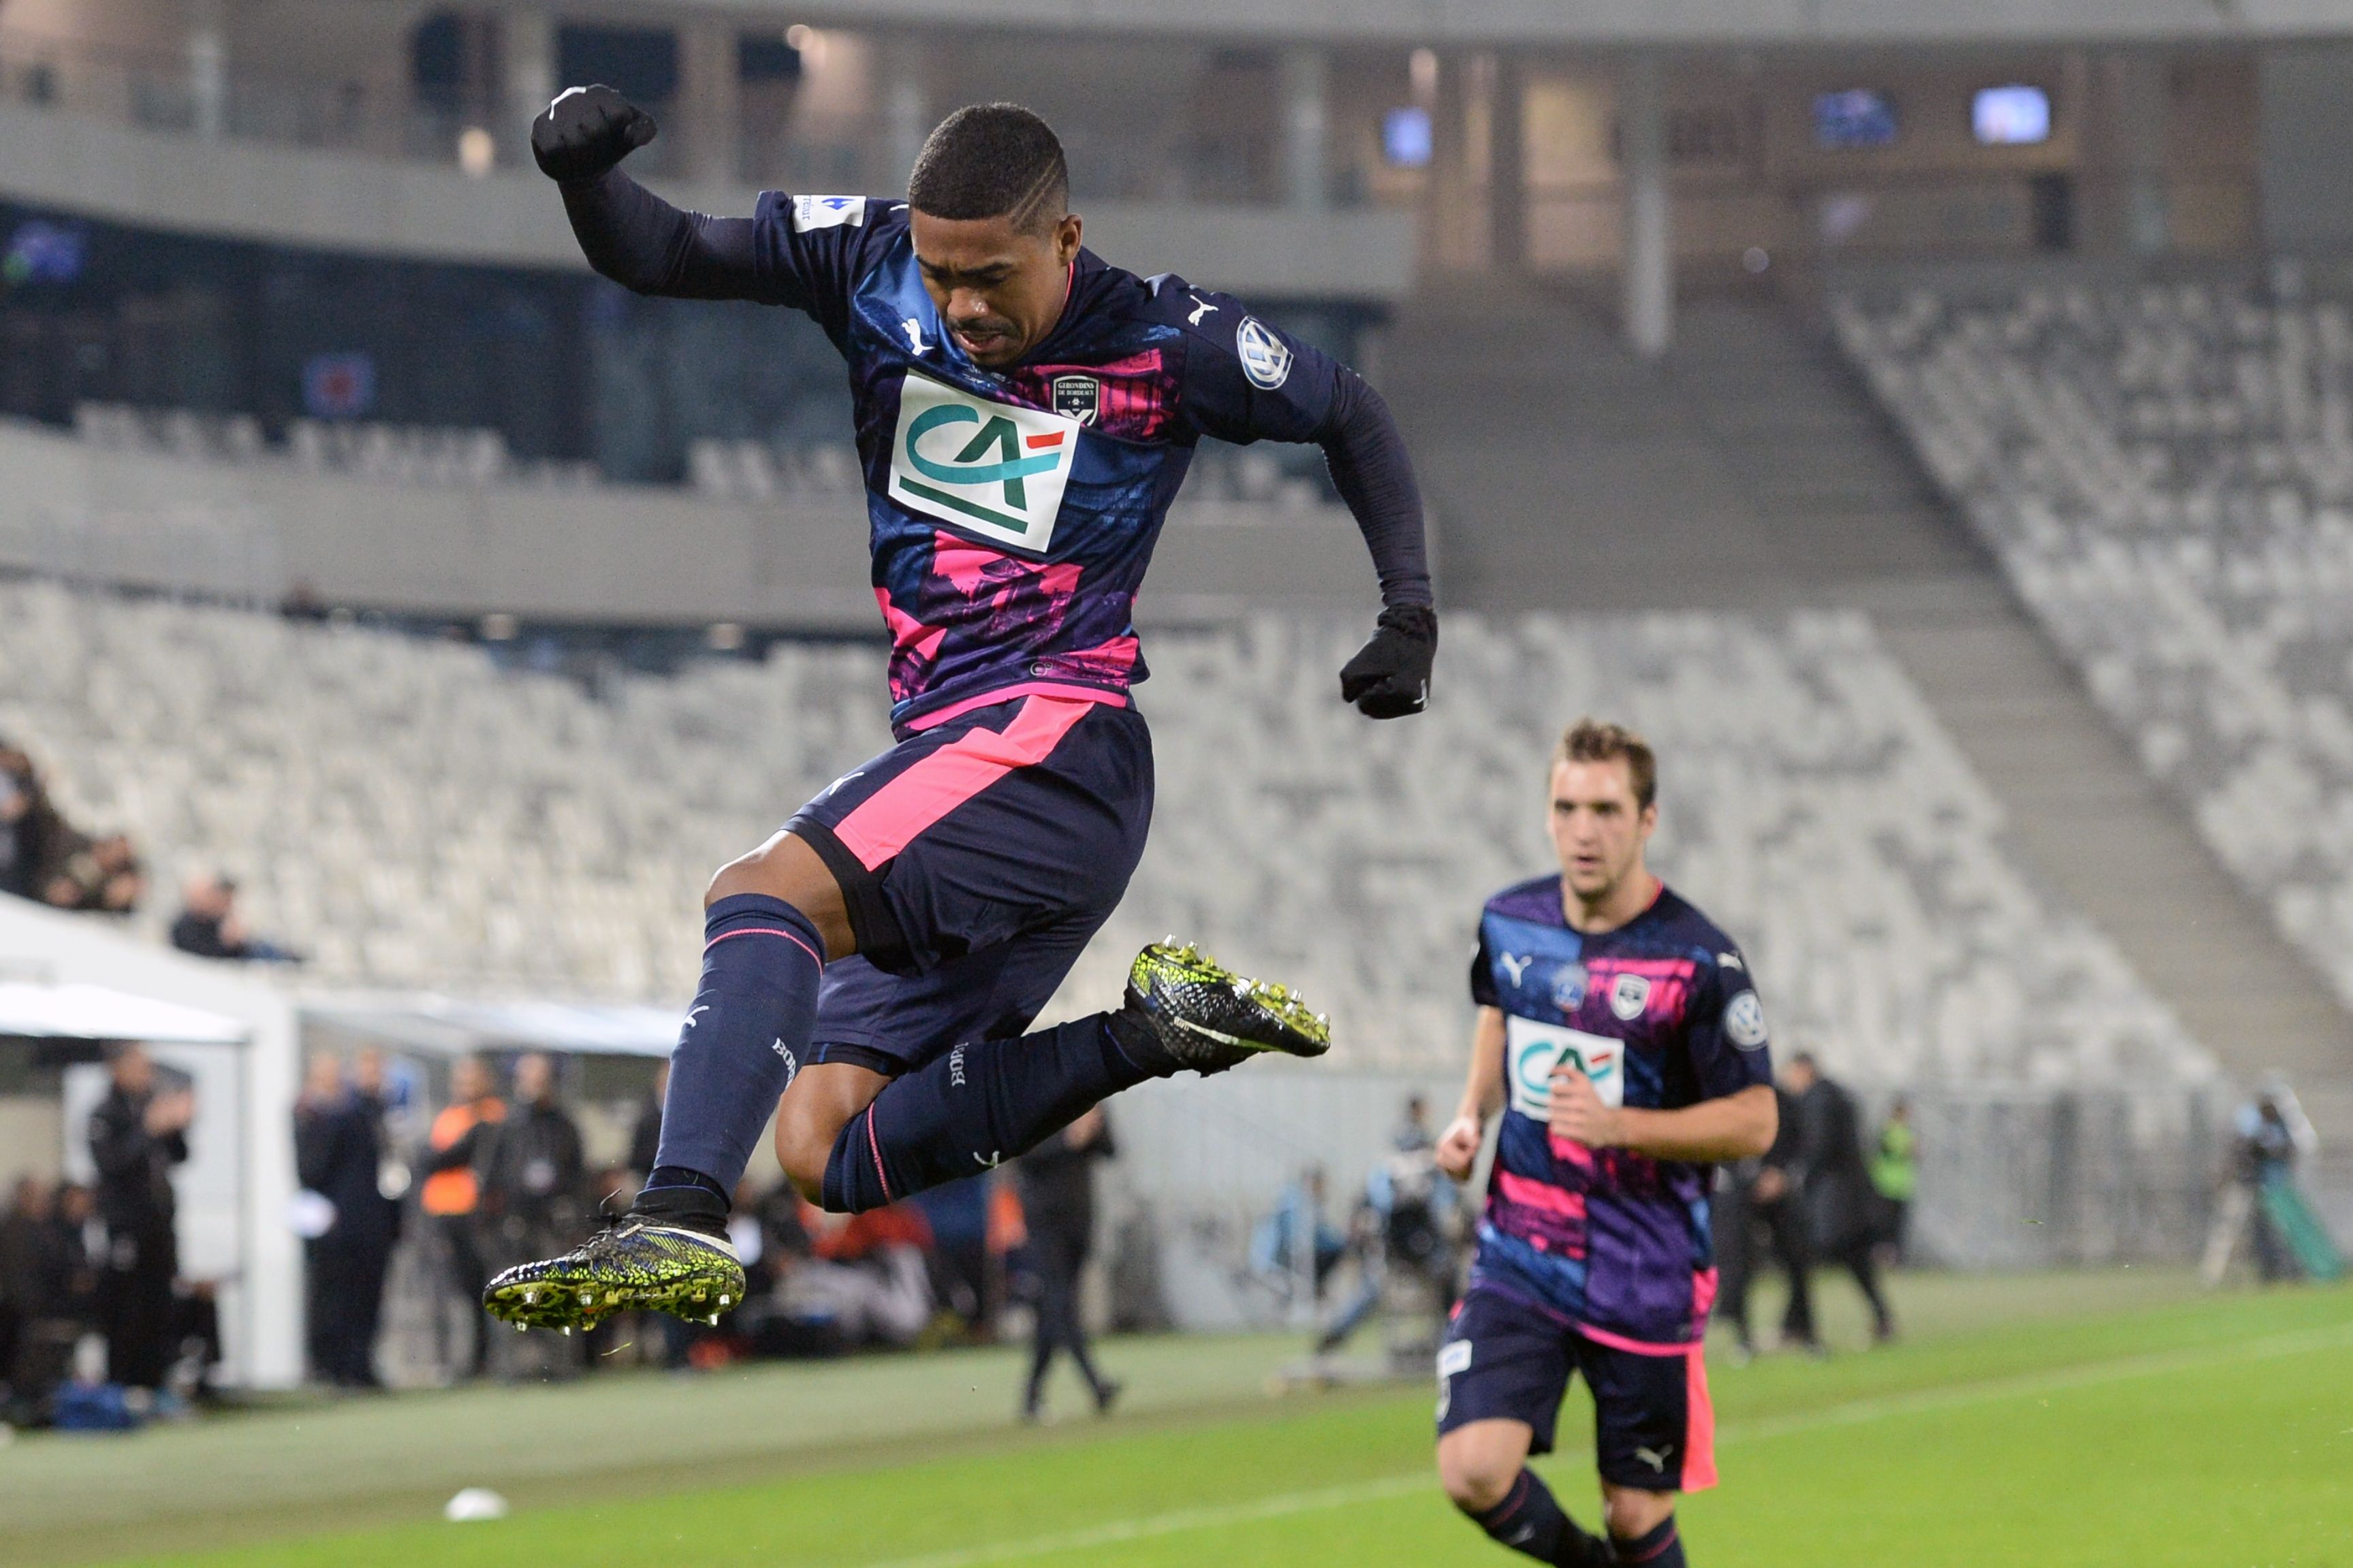 Bordeaux's Brazilian forward Malcom celebrates after scoring a goal during the French Cup football match between Bordeaux (FCGB) and Dijon on January 31, 2017 at the Matmut Atlantique stadium in Bordeaux, southwestern France. / AFP / NICOLAS TUCAT        (Photo credit should read NICOLAS TUCAT/AFP/Getty Images)